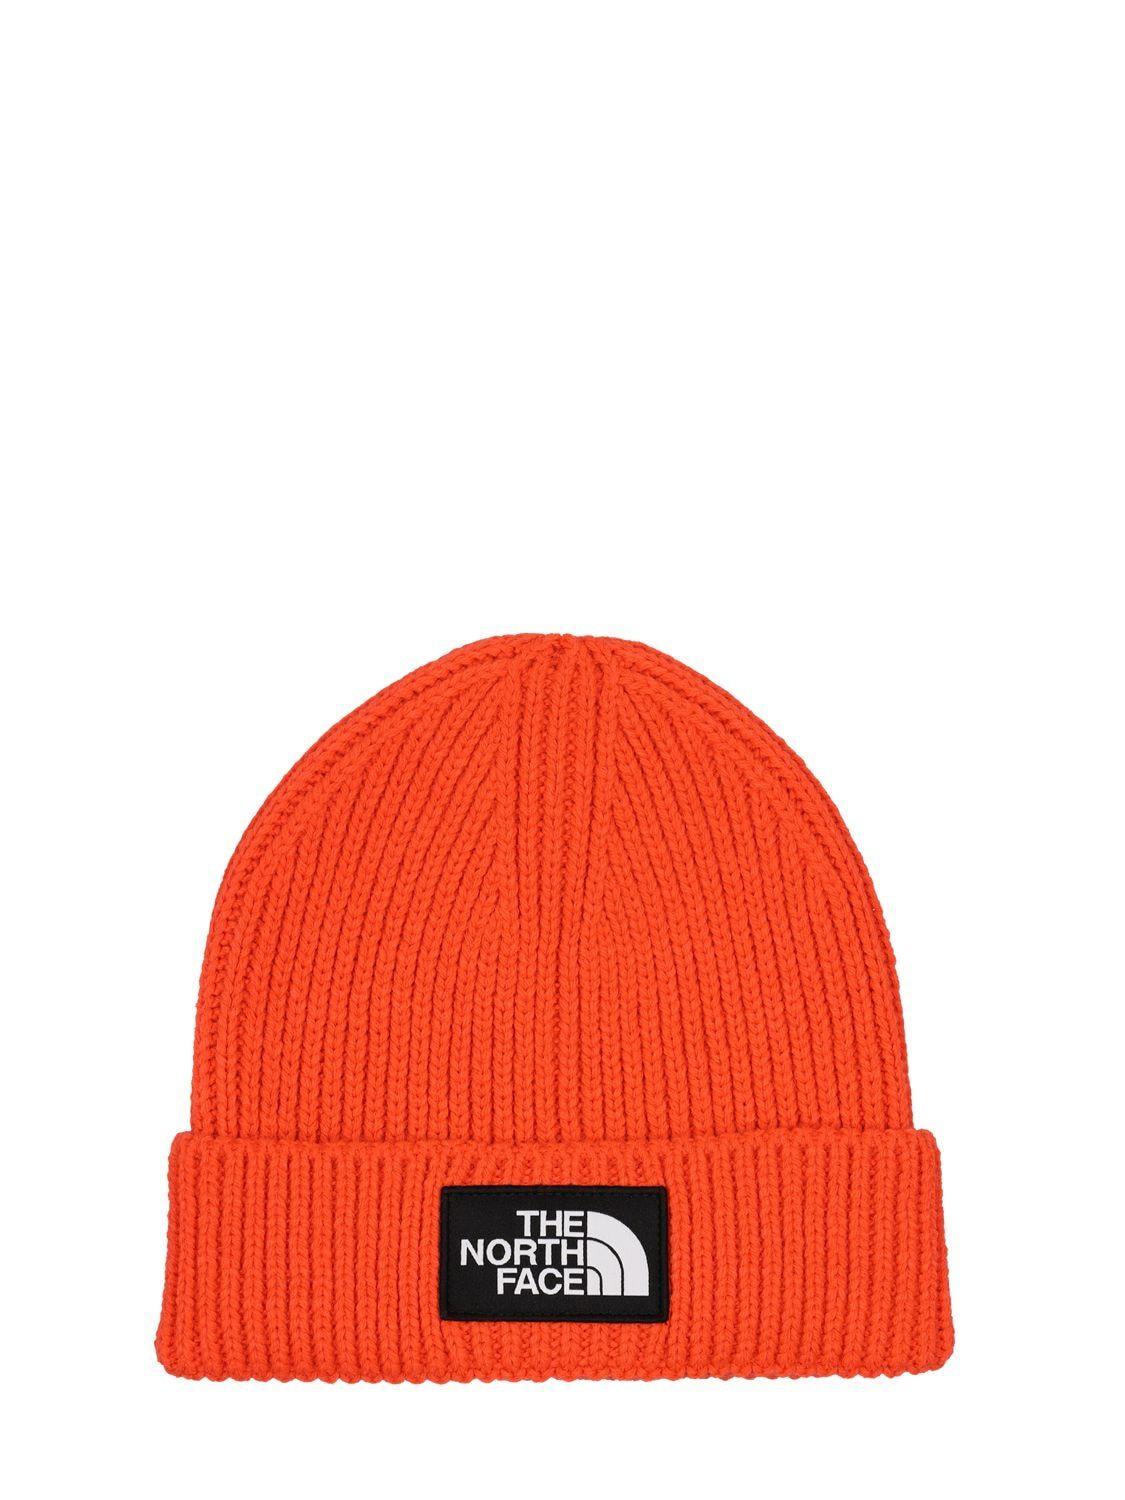 The North Face Logo Acrylic Blend Knit Beanie in Red | Lyst